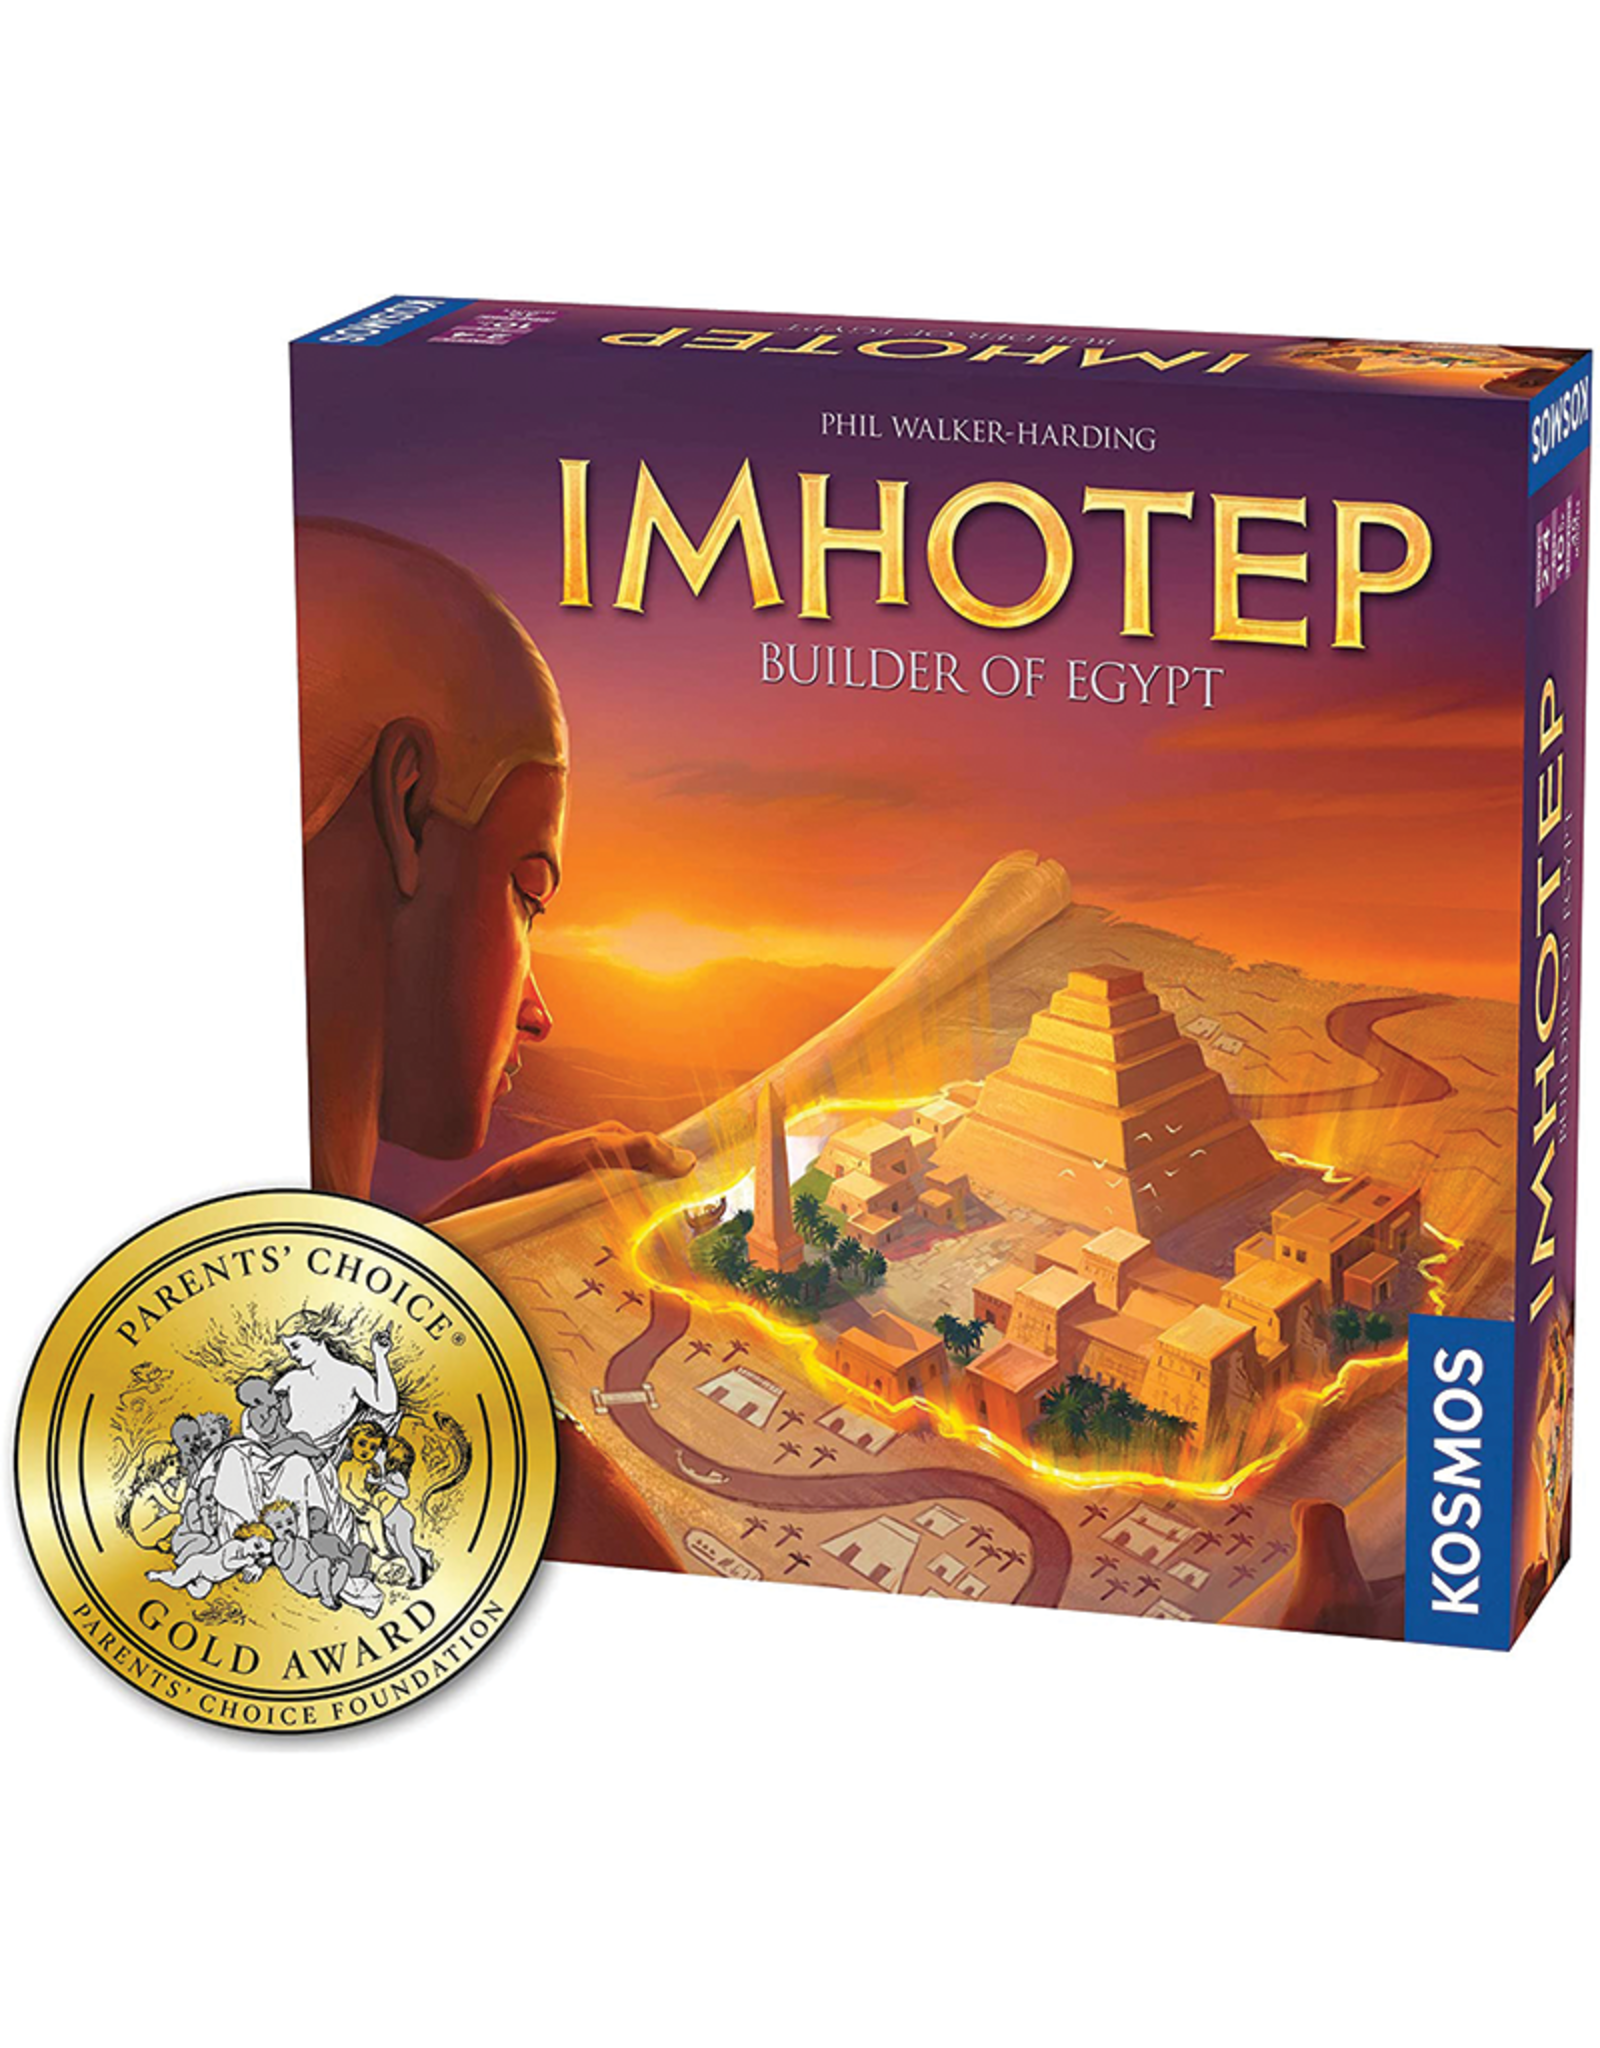 Imhotep, Builder of Egypt